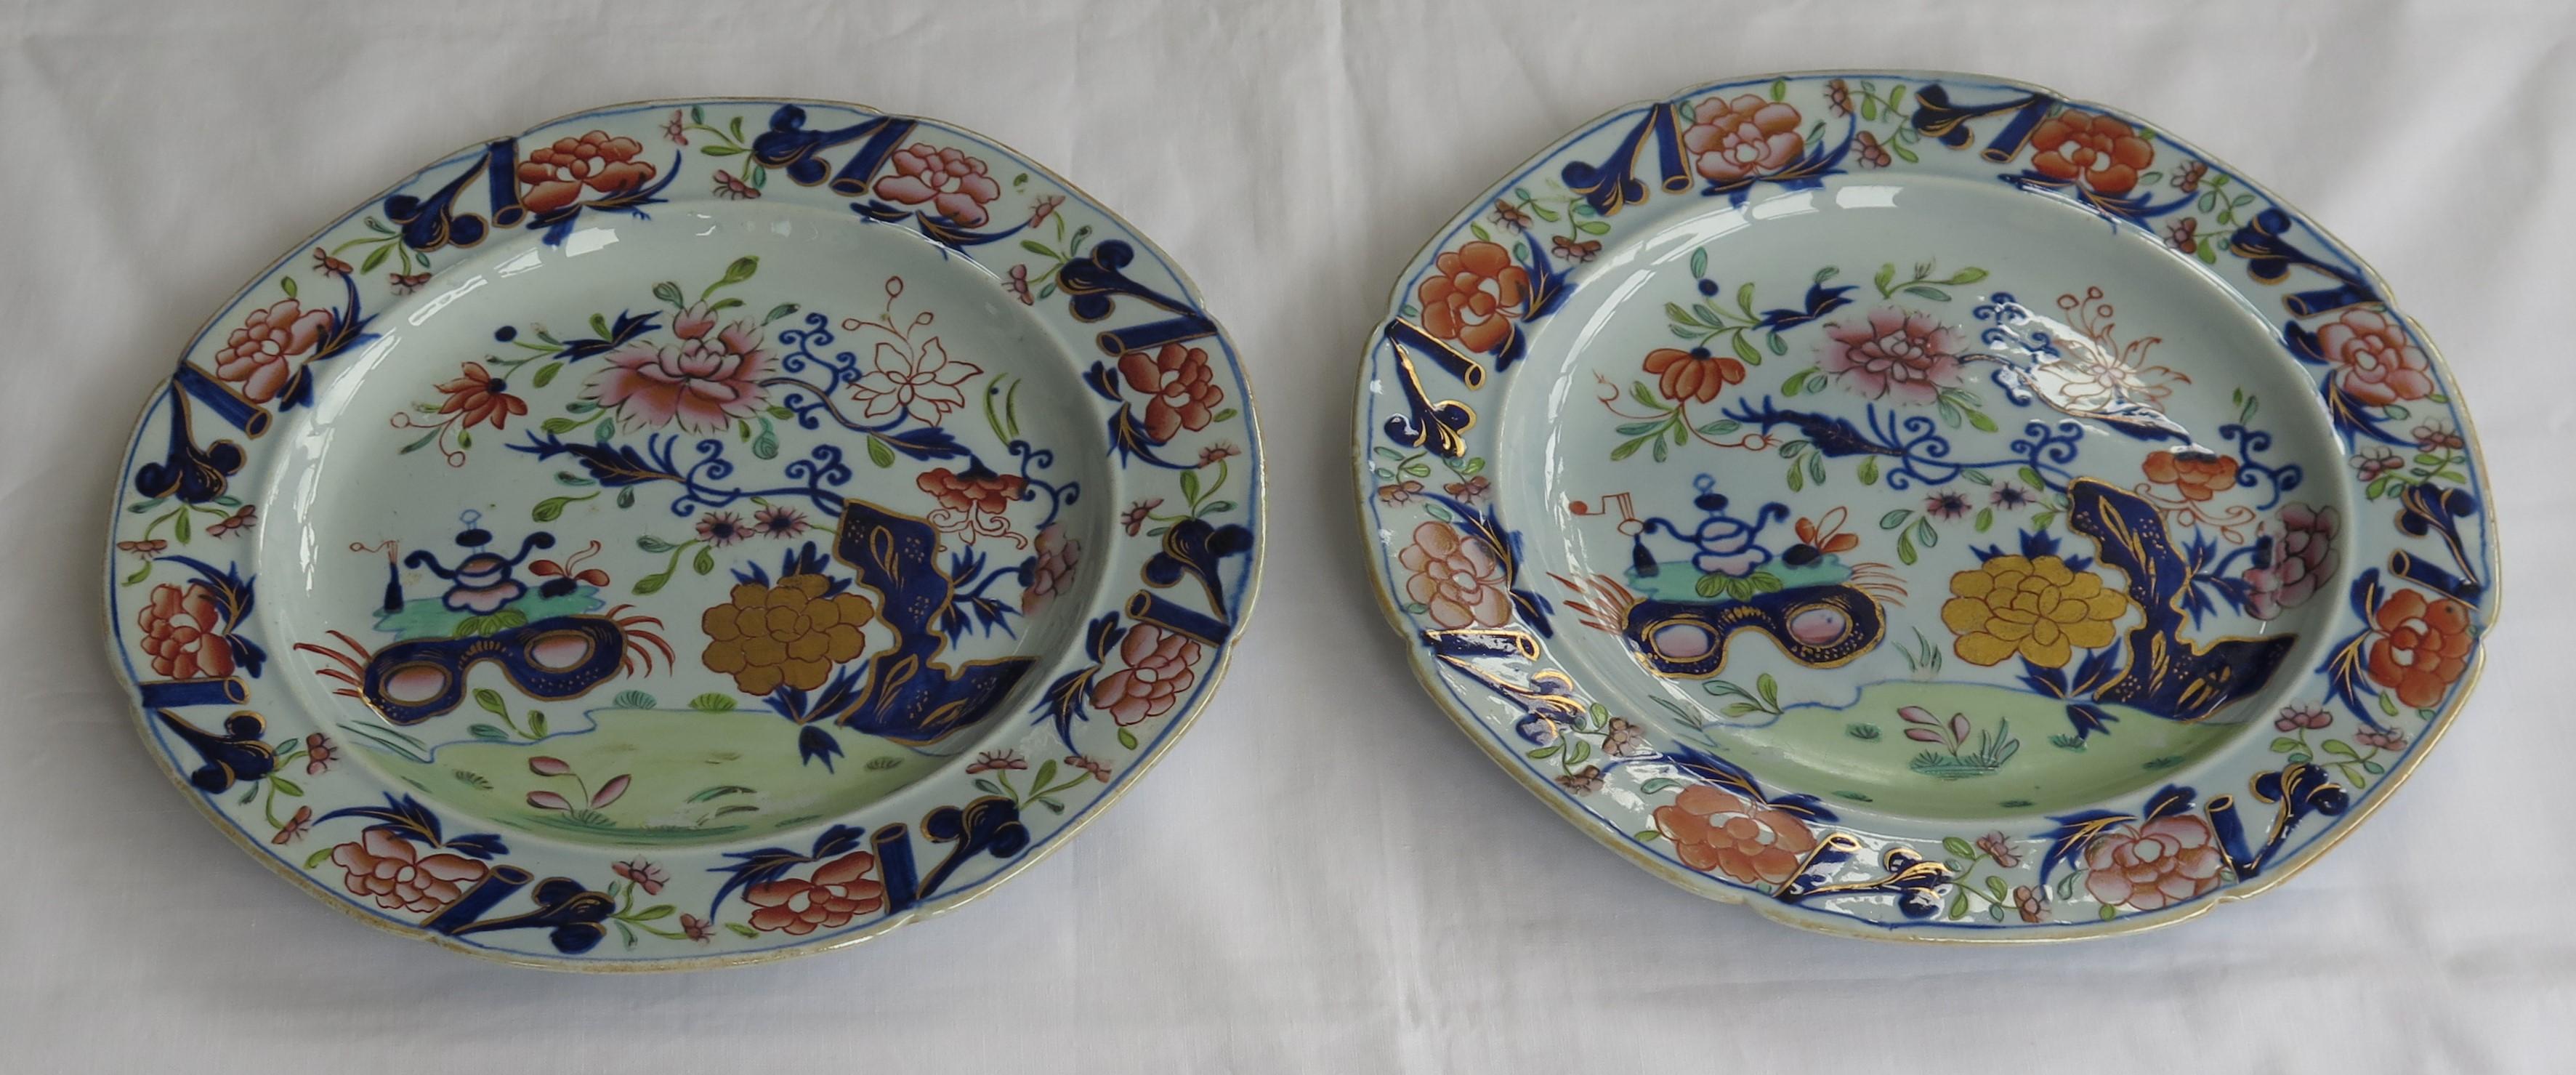 English Fine Pair of Georgian Mason's Dinner Plates in Small Vase, Flowers and Rocks Ptn